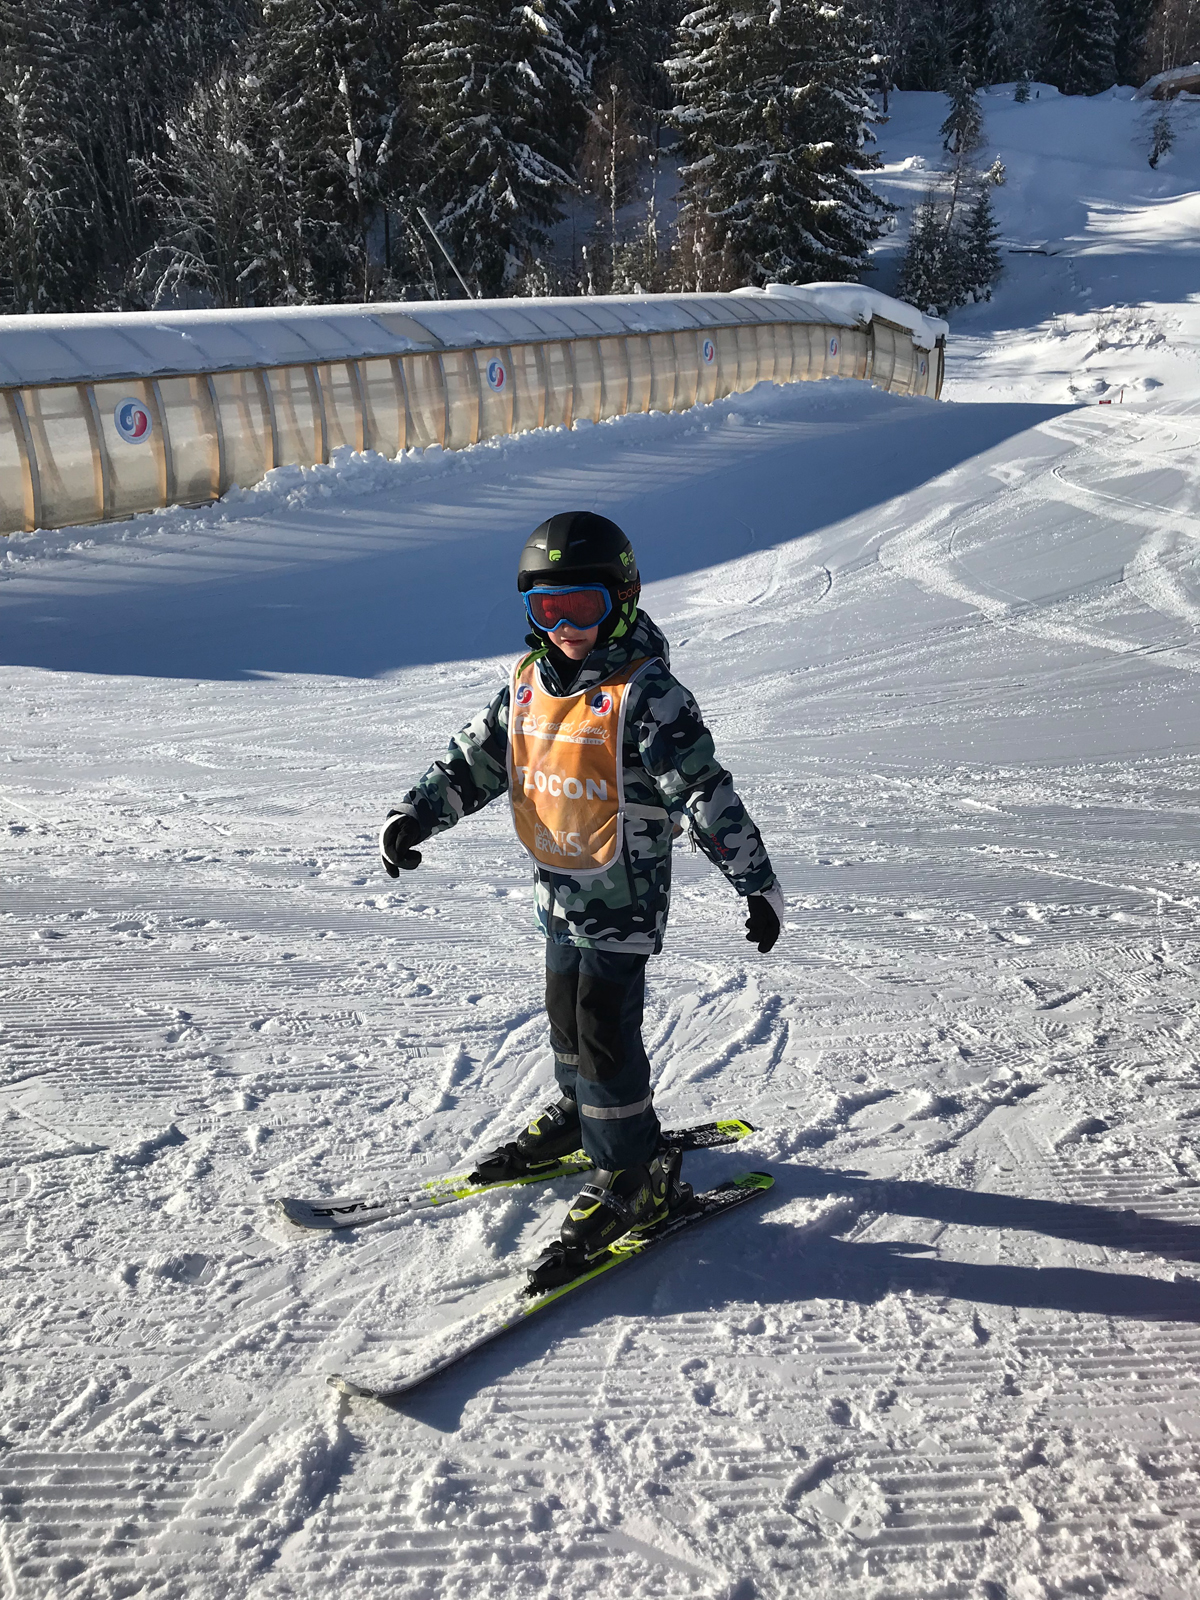 The 6yo learning to ski at St Gervais’s excellent ski school